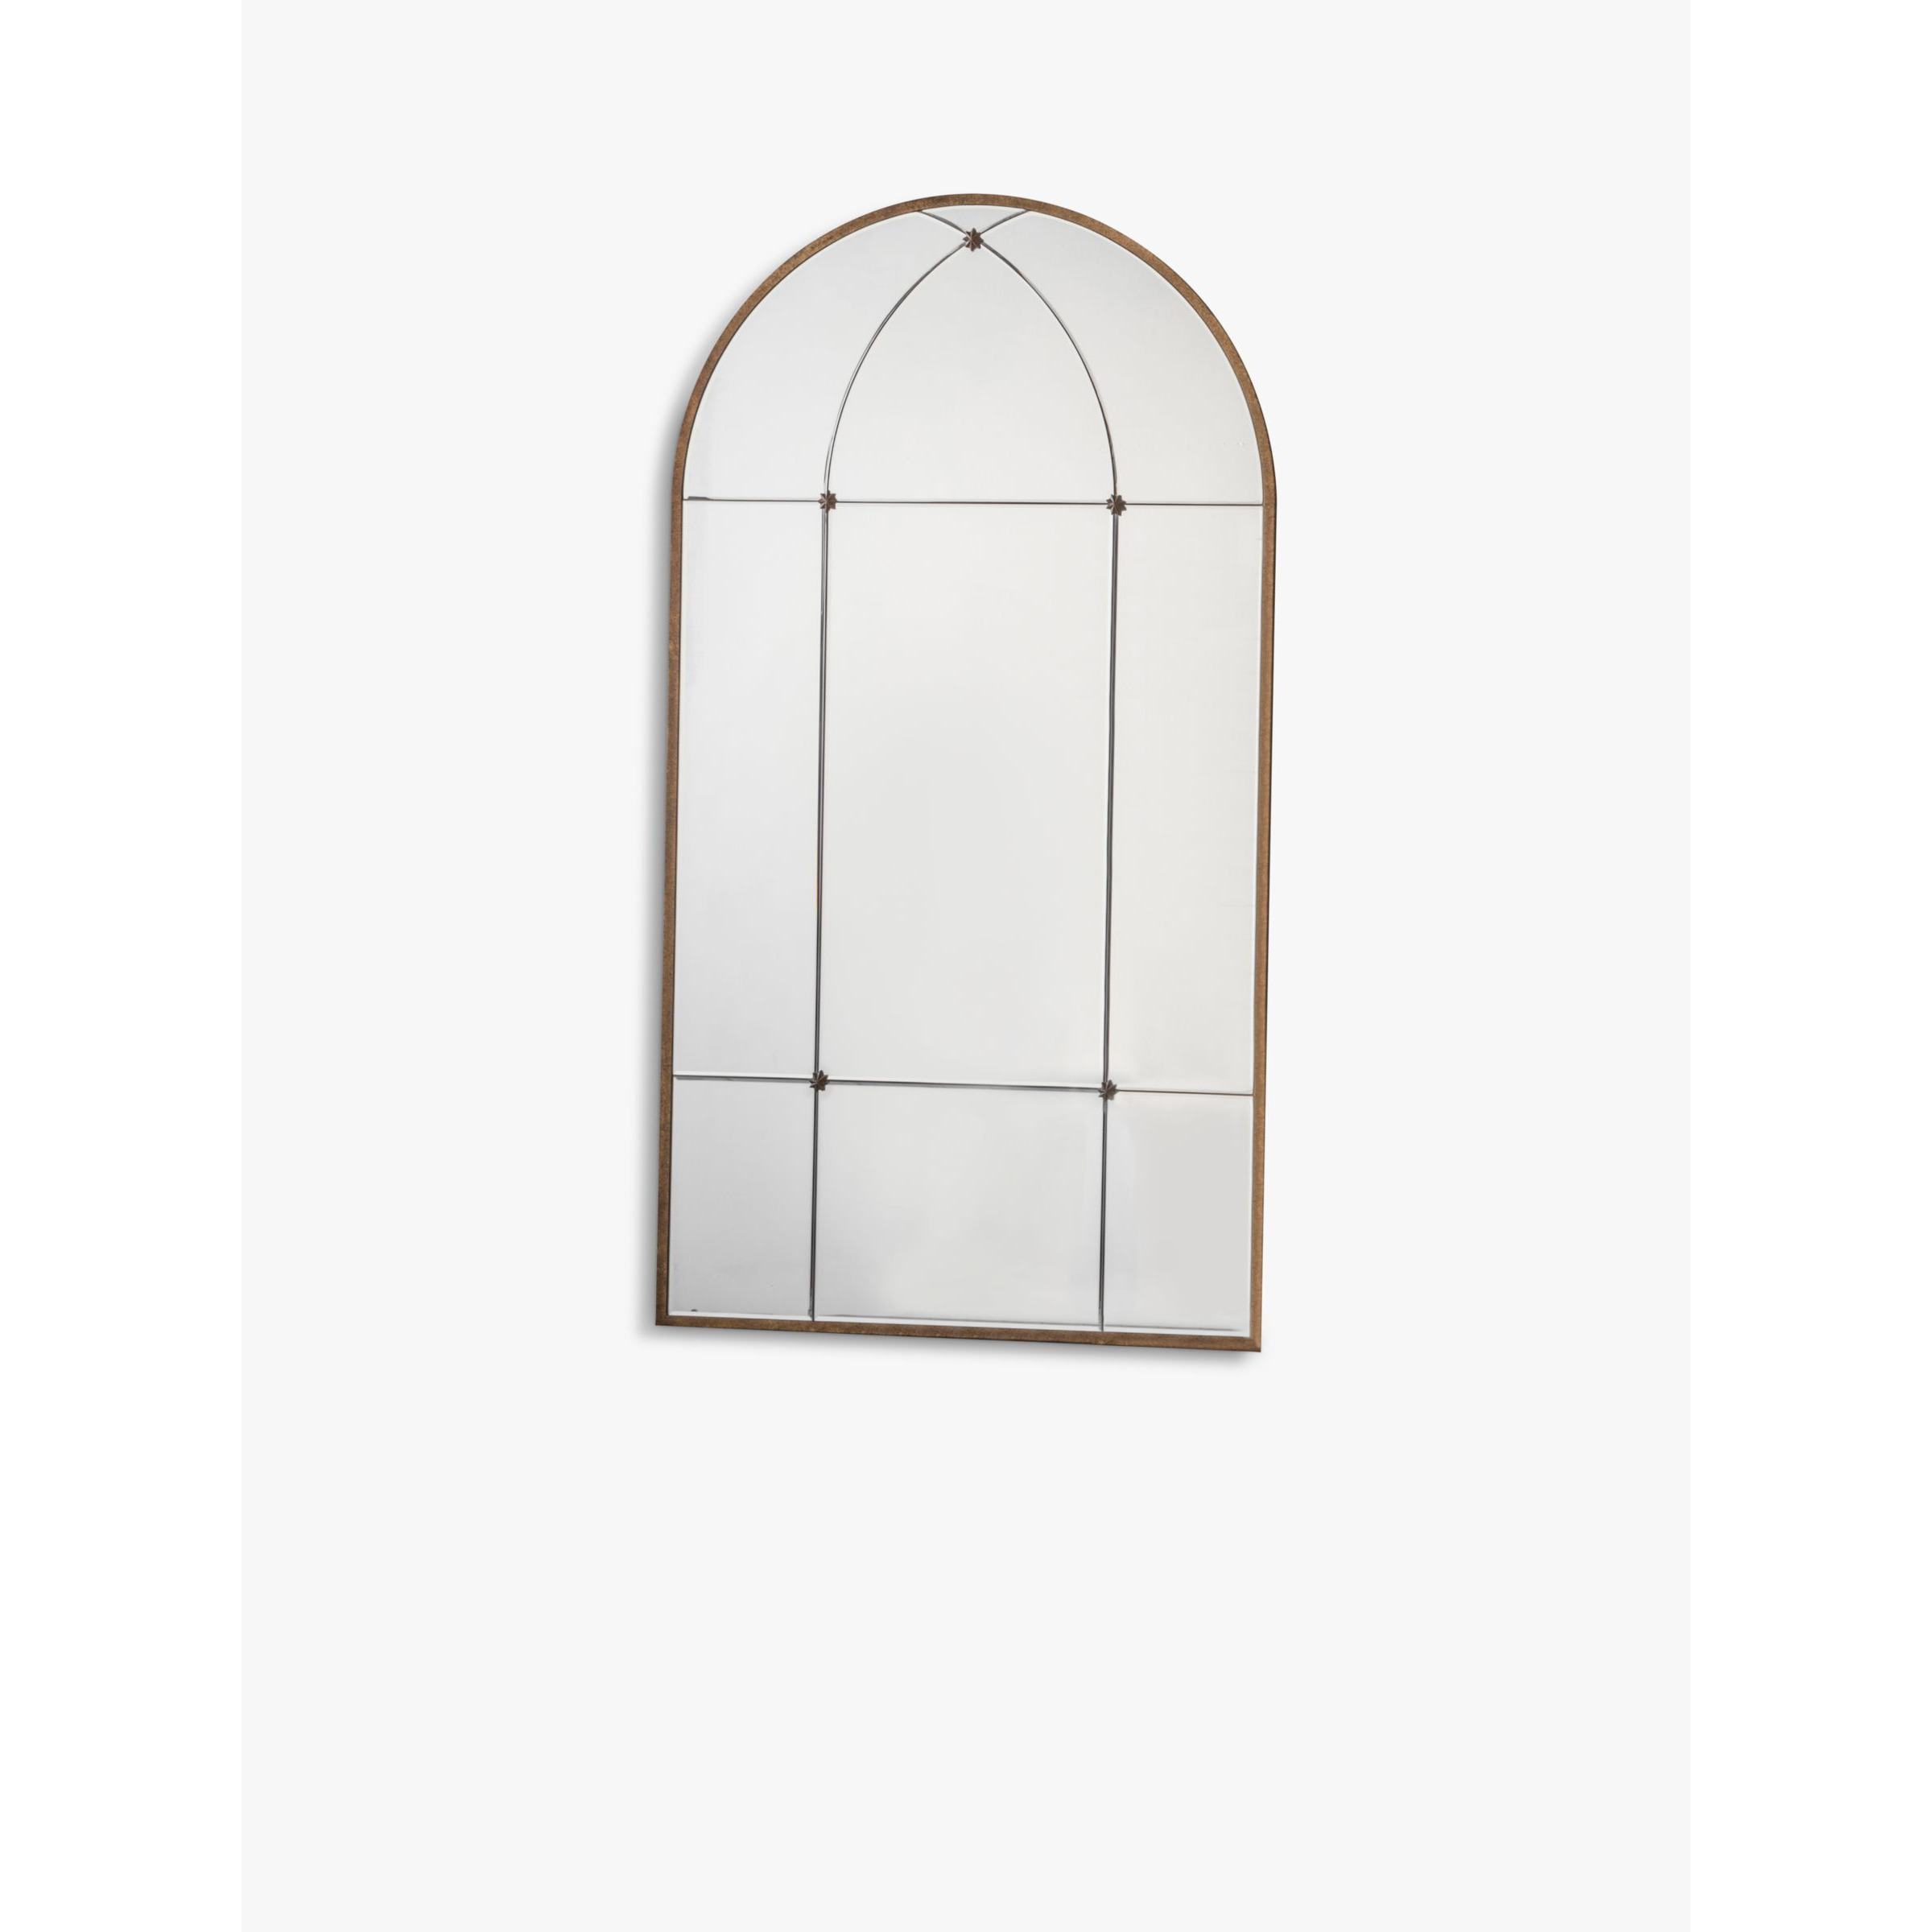 Gallery Direct Ariah Arched Frame Mirror, 140 x 76cm, Bronze - image 1